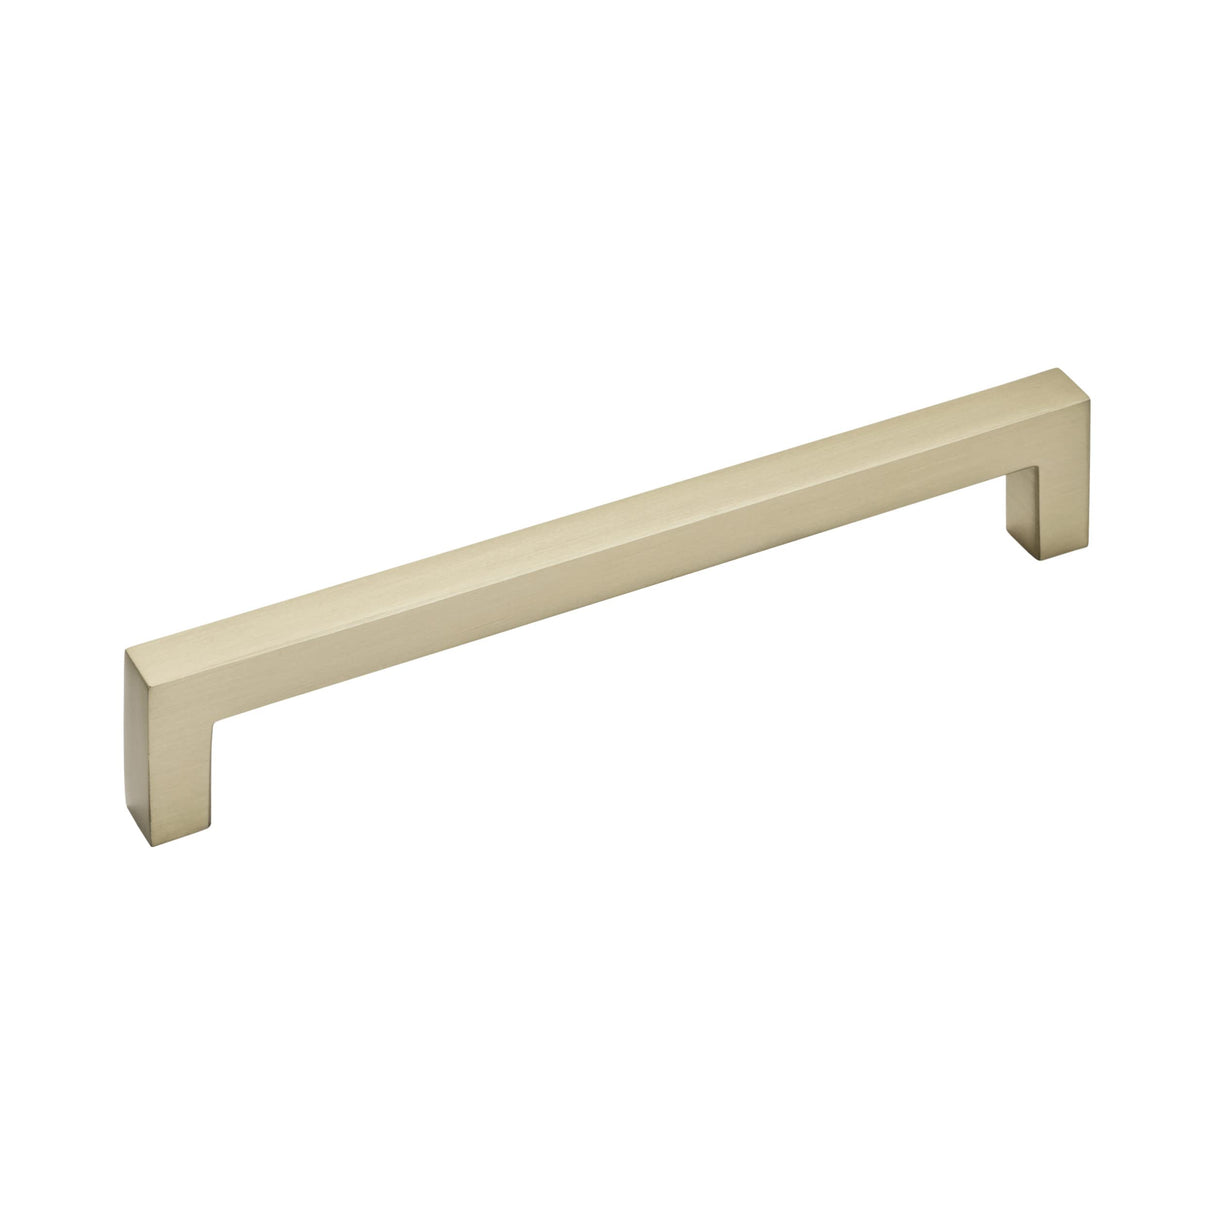 Amerock Cabinet Pull Golden Champagne 6-5/16 inch (160 mm) Center to Center Monument 1 Pack Drawer Pull Drawer Handle Cabinet Hardware